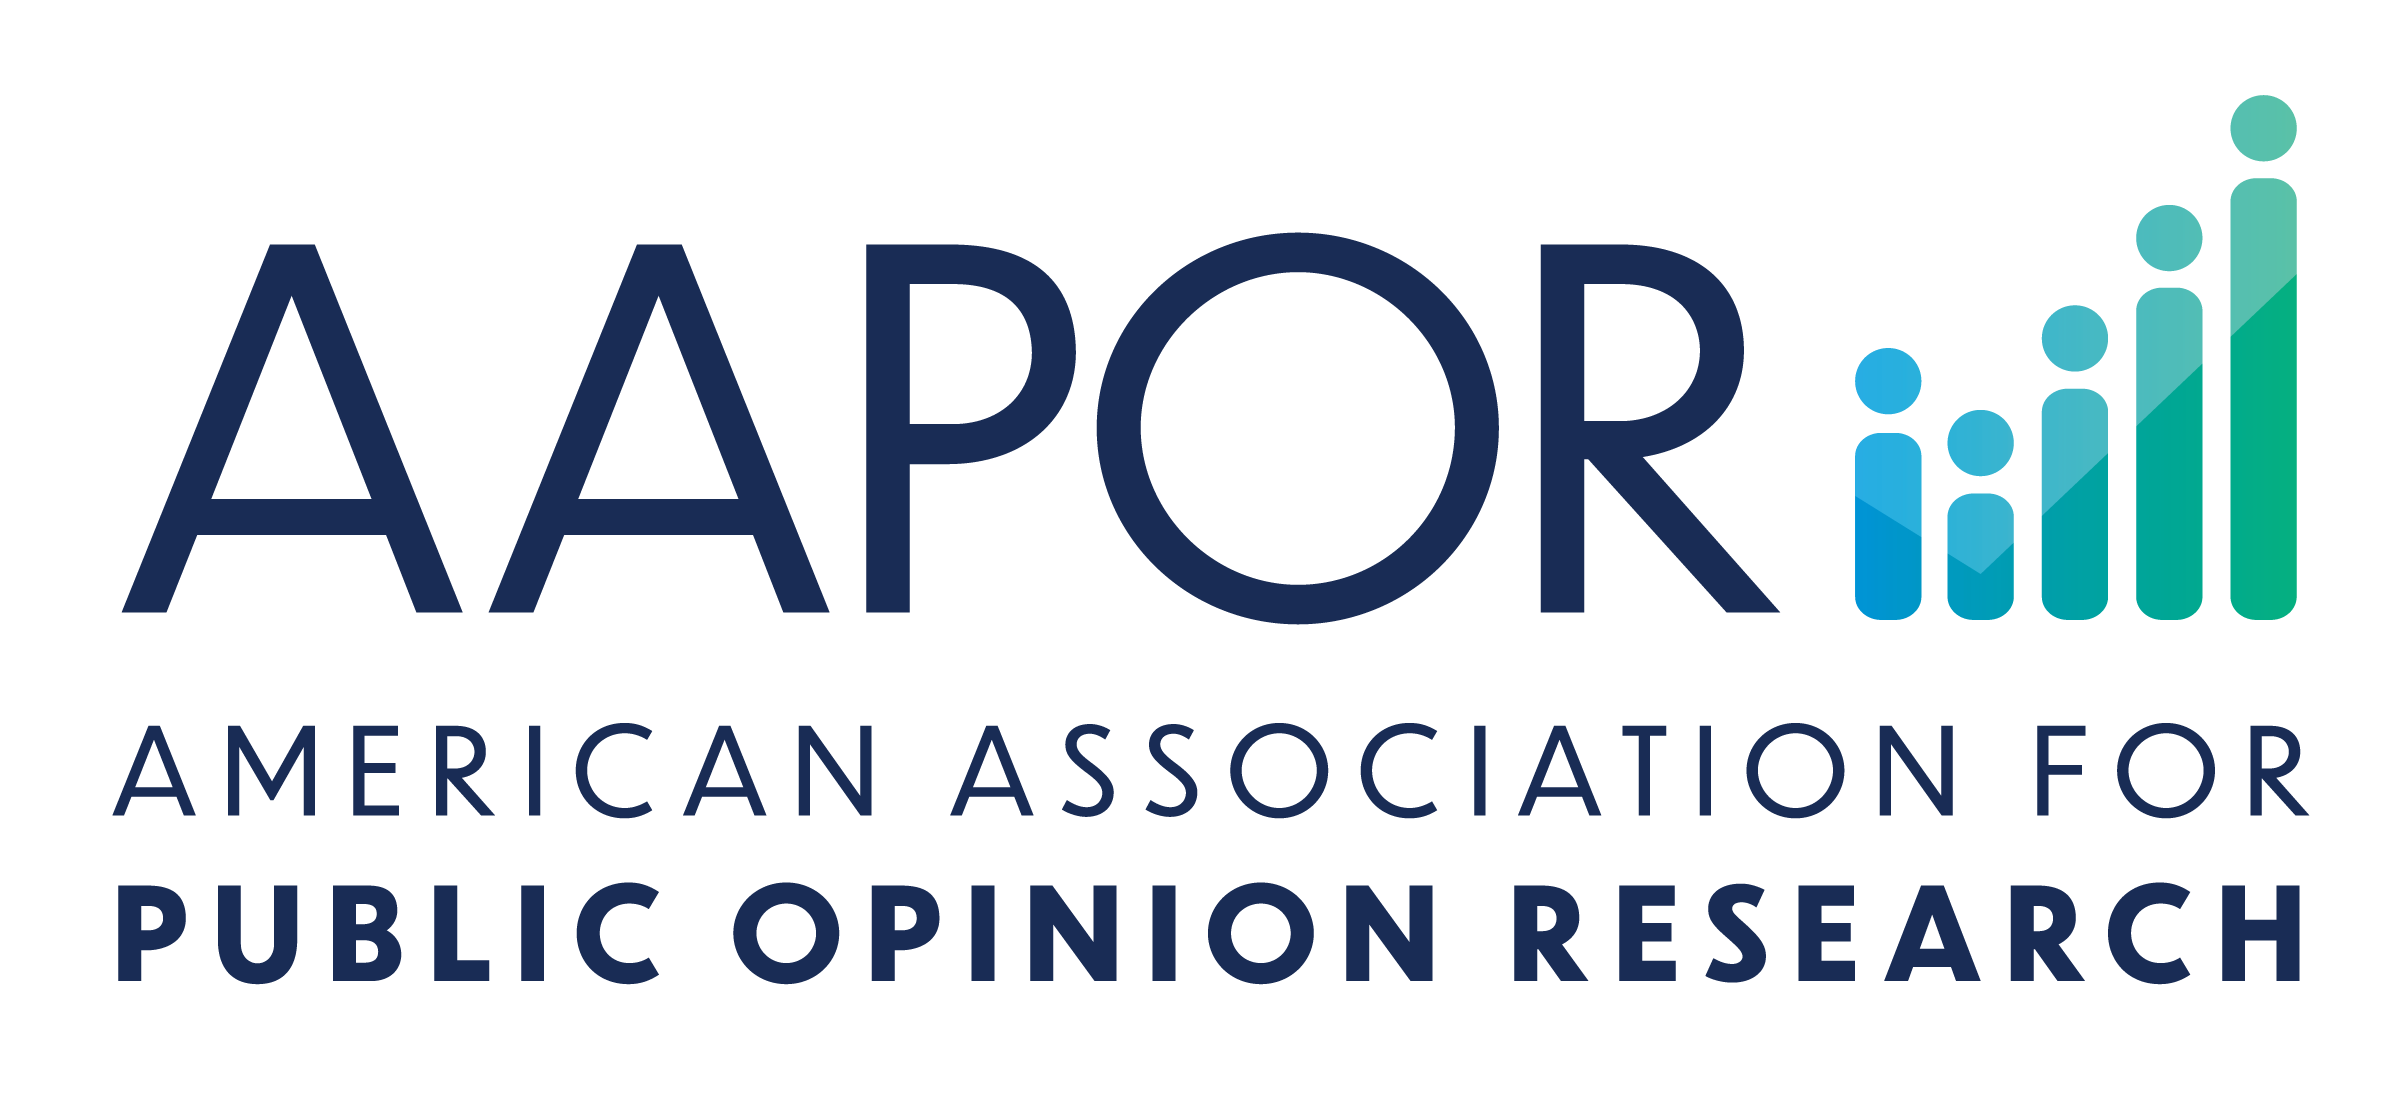 American Association for Public Opinion Research